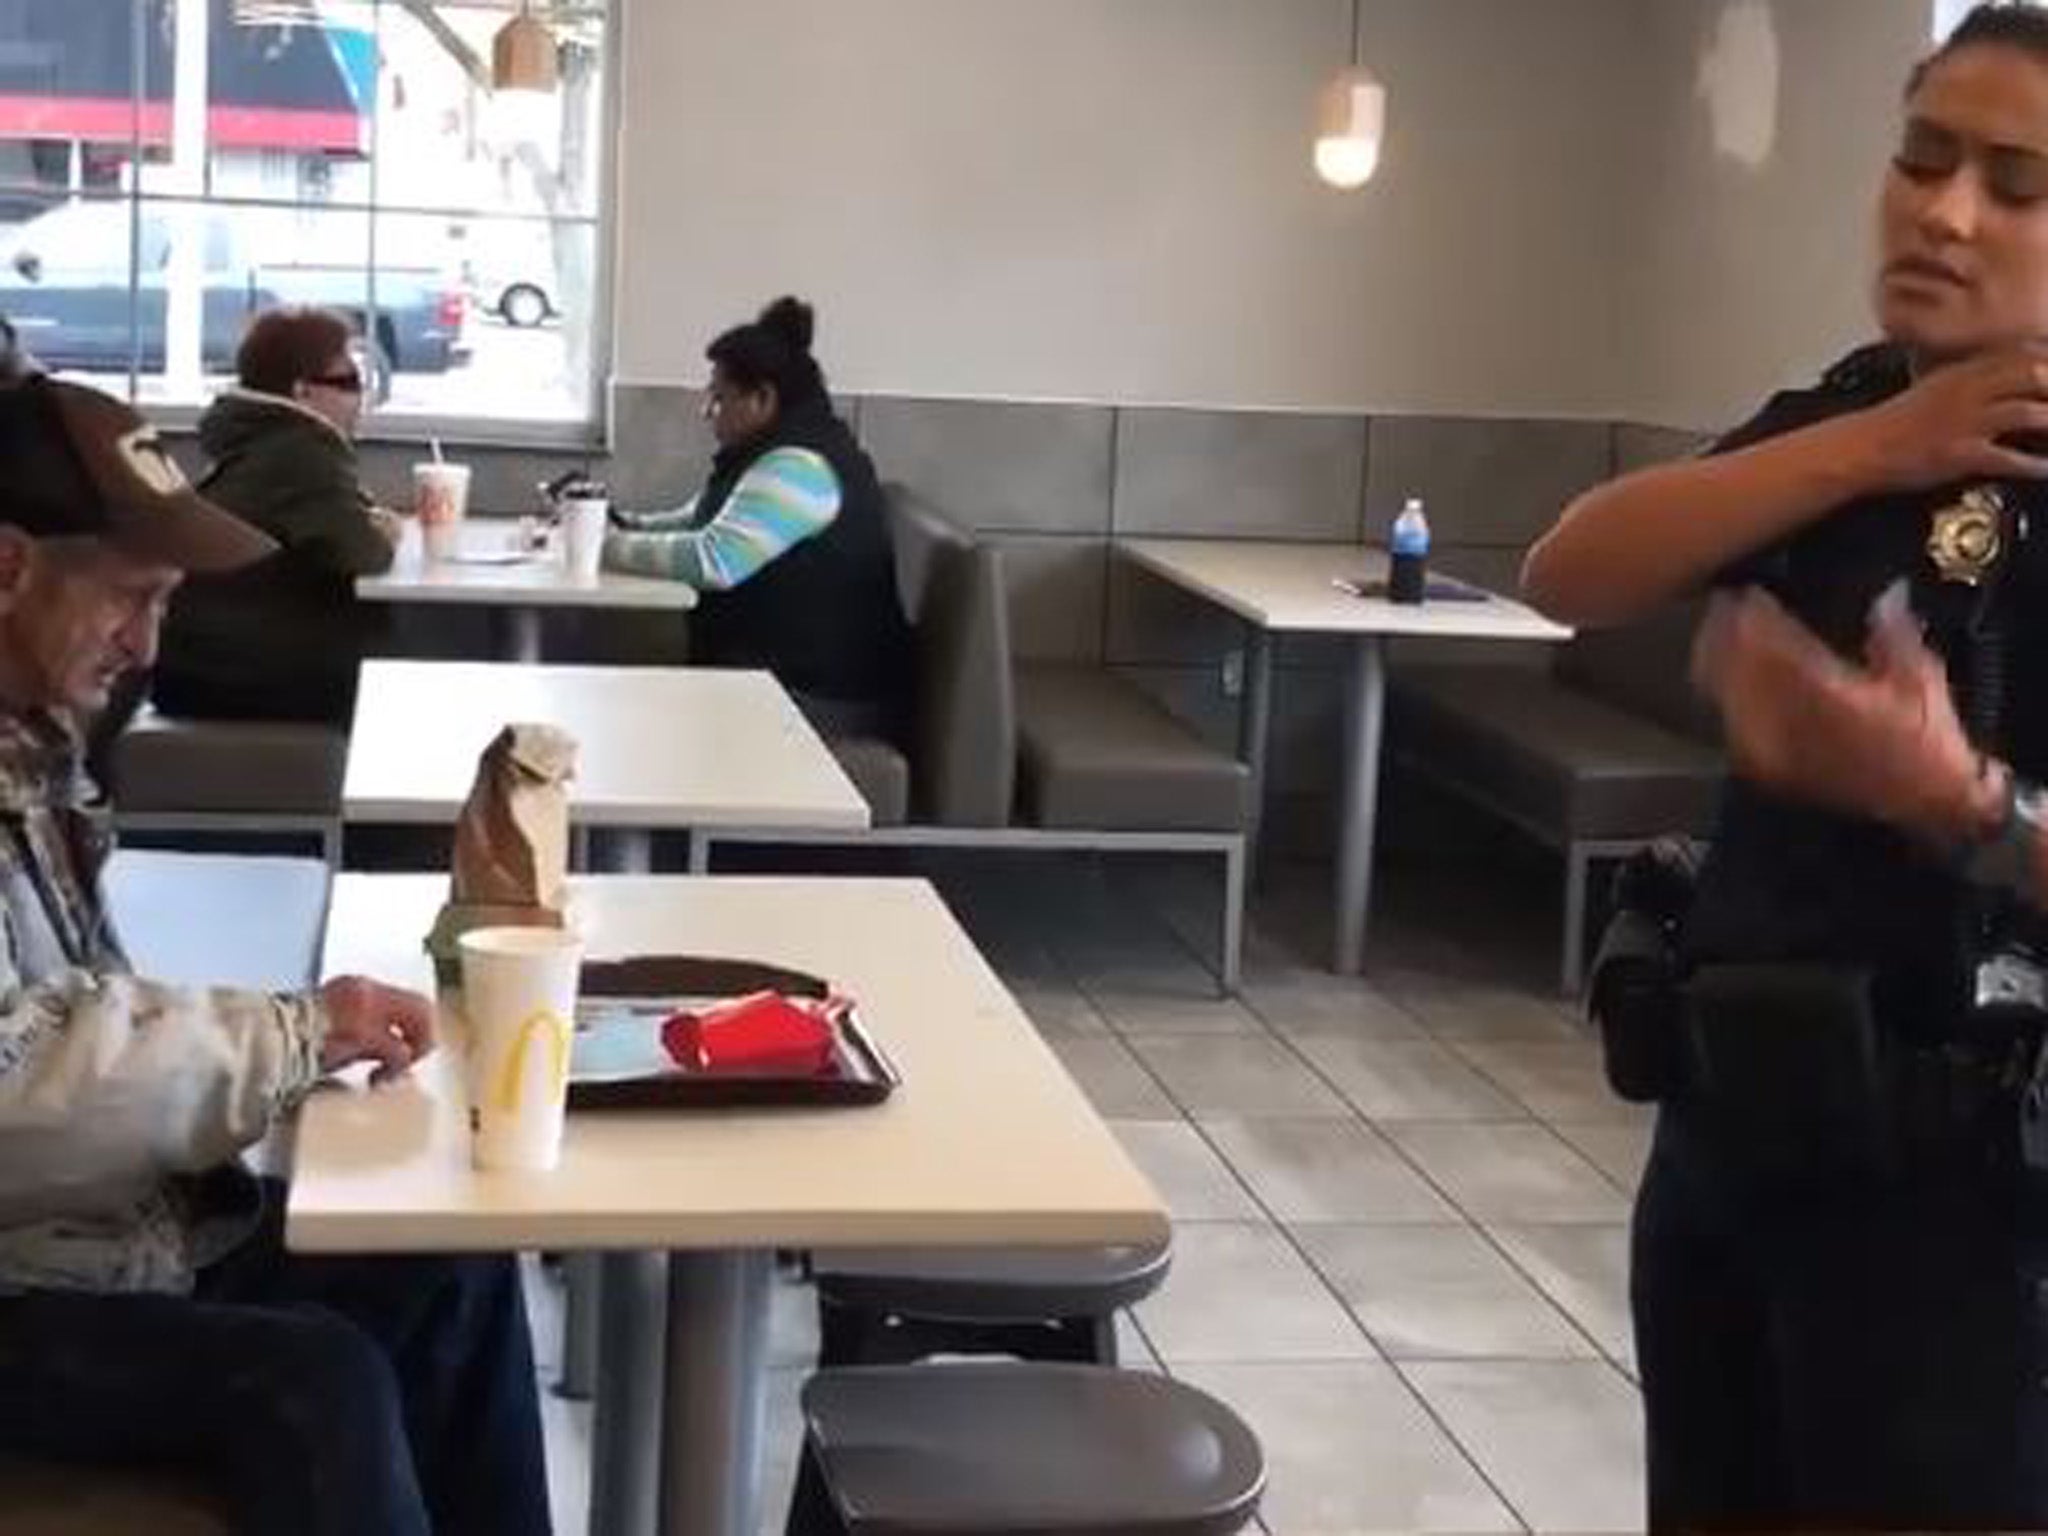 McDonalds kick out homeless man after customer buys him food The Independent The Independent